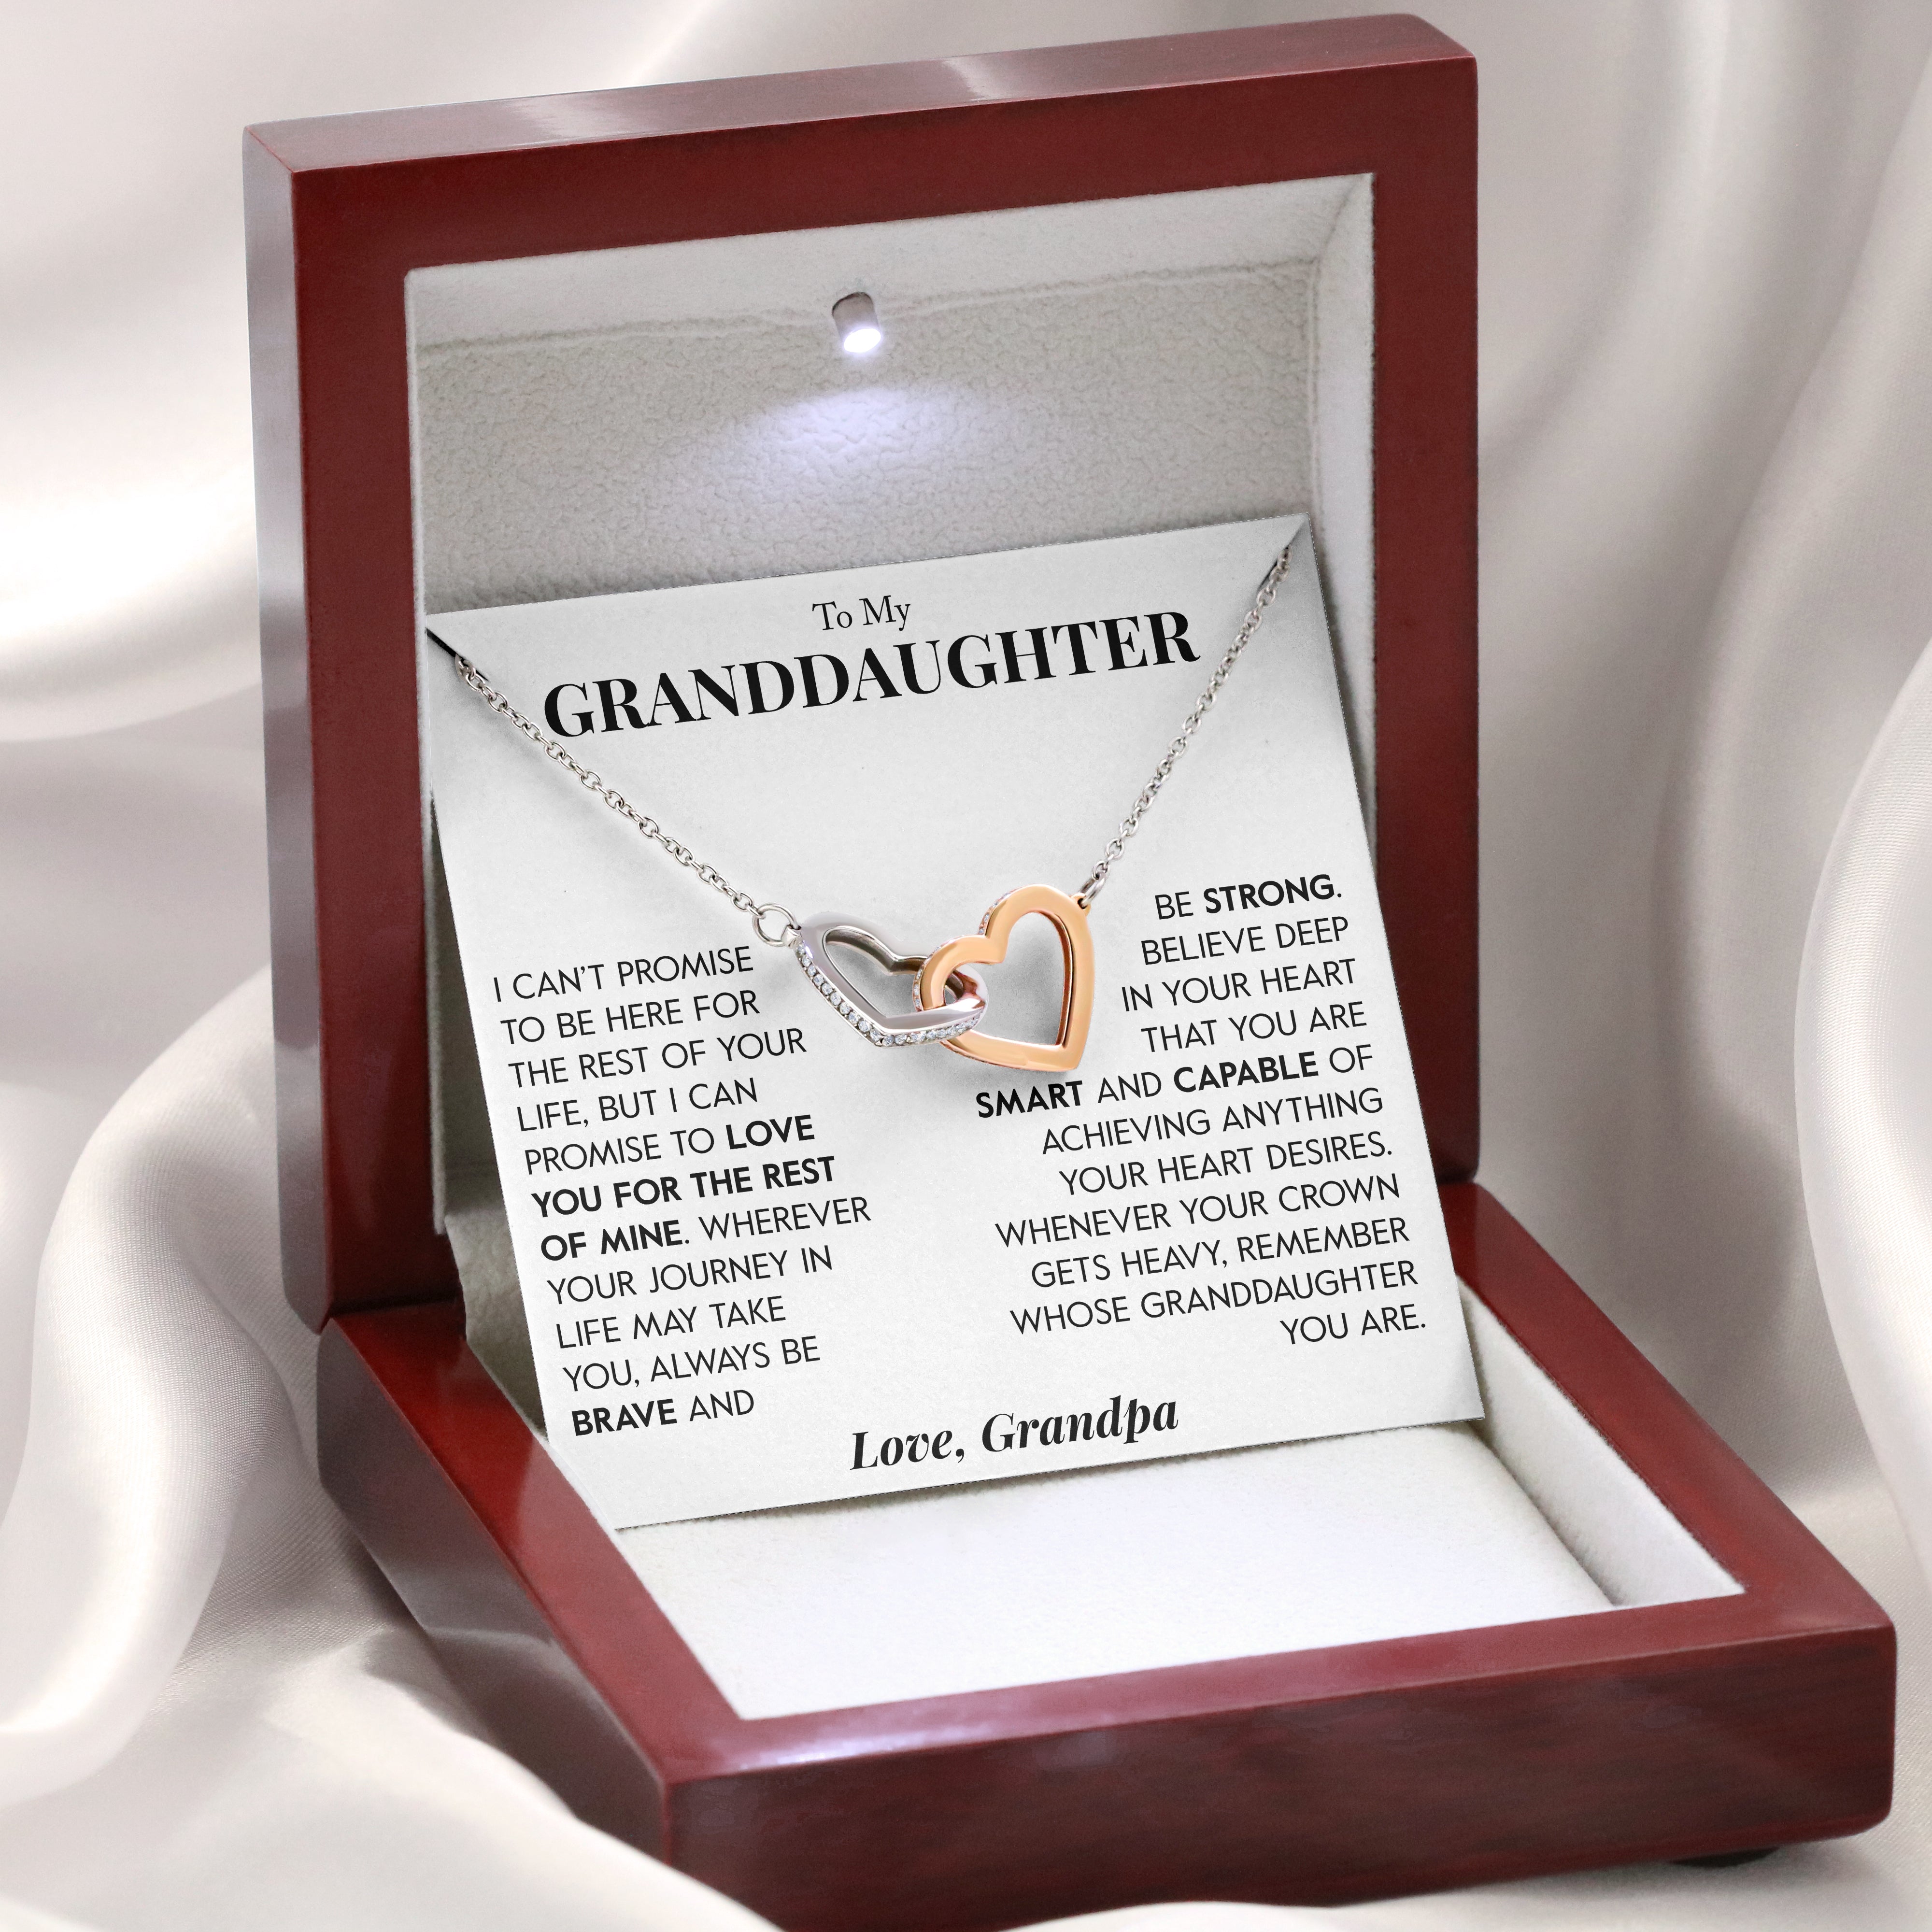 To My Granddaughter | "Rest of my Life" | Interlocking Hearts Necklace